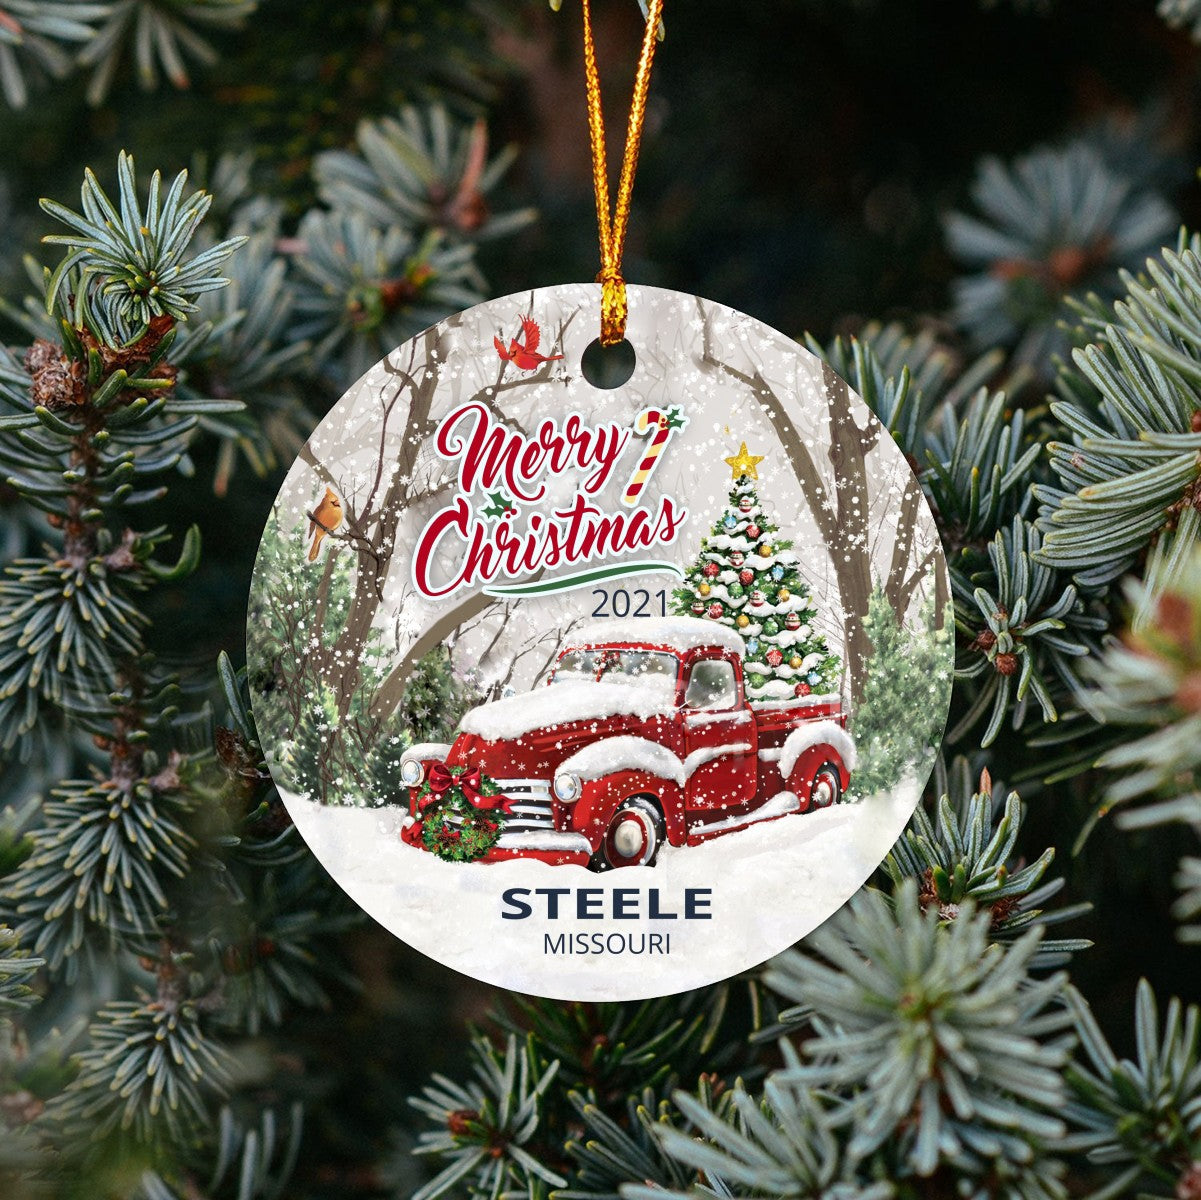 Christmas Tree Ornaments Steele - Ornament With Name City, State Steele Missouri MO Ornament - Red Truck Xmas Ornaments 3'' Plastic Gift For Family, Friend And Housewarming